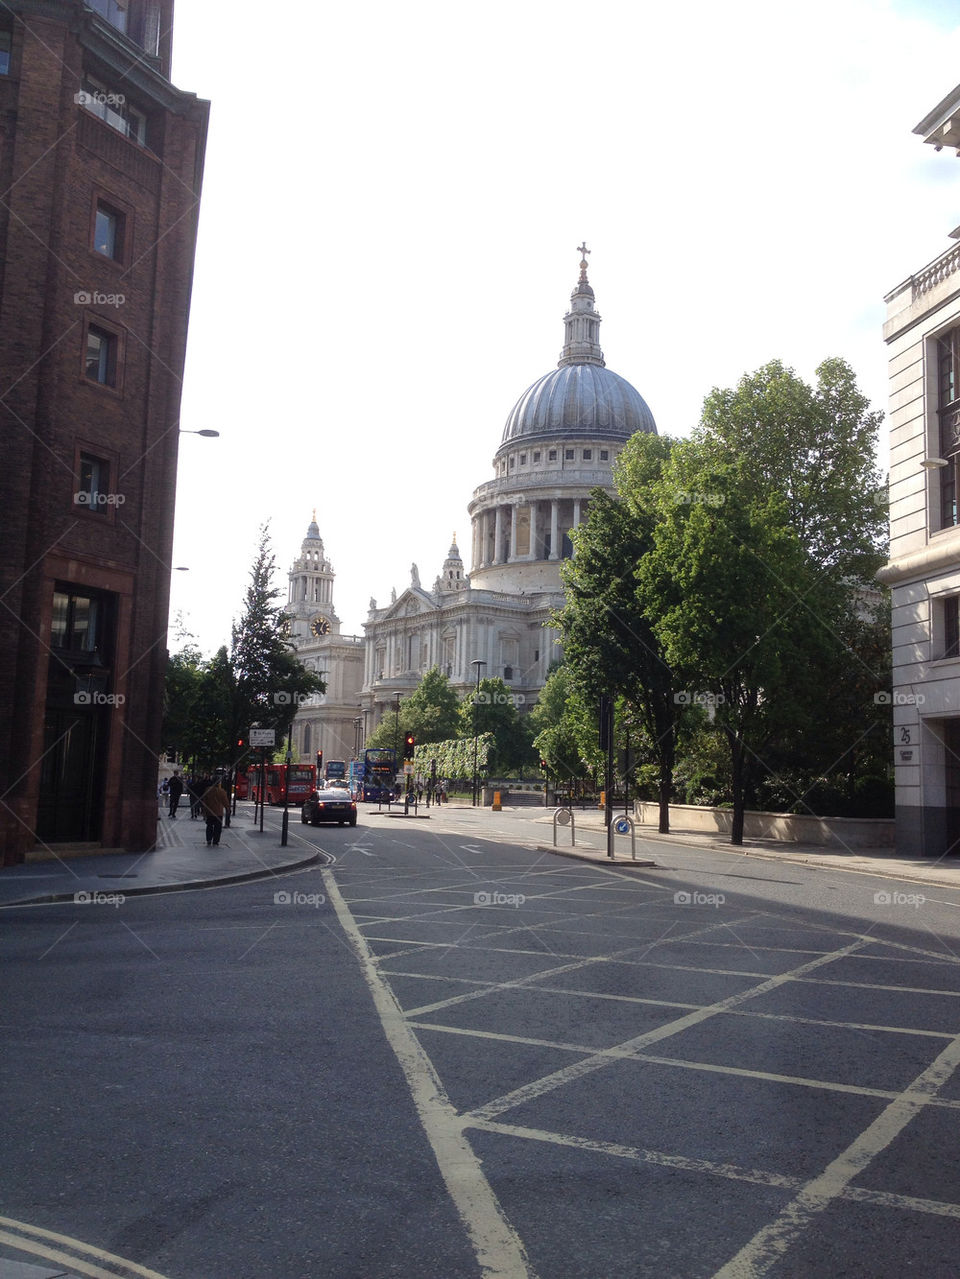 A QUIET SUNDAY AFTERNOON AT ST PAUL'S CATHEDRAL.